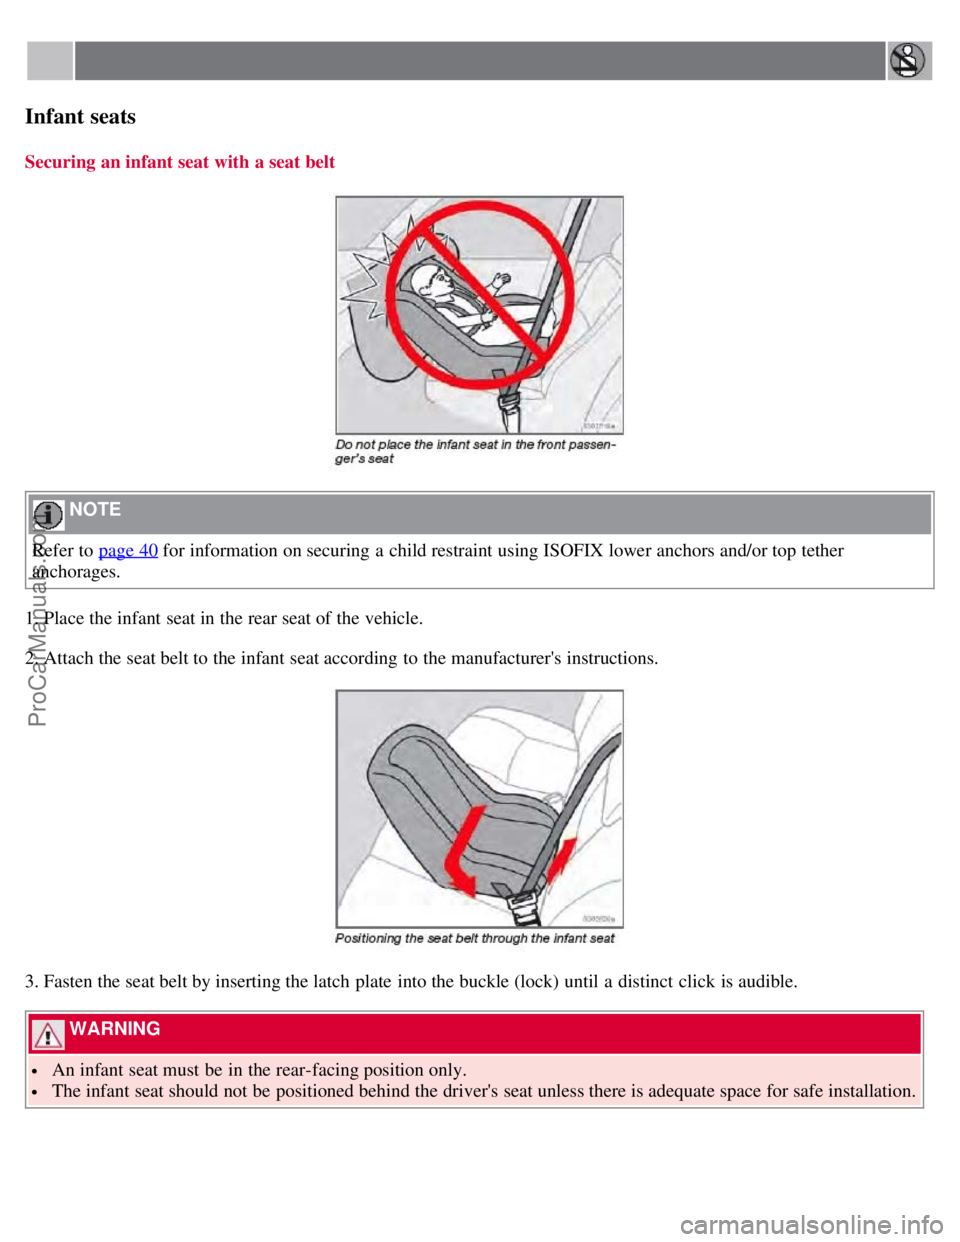 VOLVO S60 2008  Owners Manual Infant seats
Securing an infant seat with a seat belt
 NOTE 
Refer to page 40
 for information on securing a  child restraint using ISOFIX lower anchors and/or top tether
anchorages.
1. Place the infa